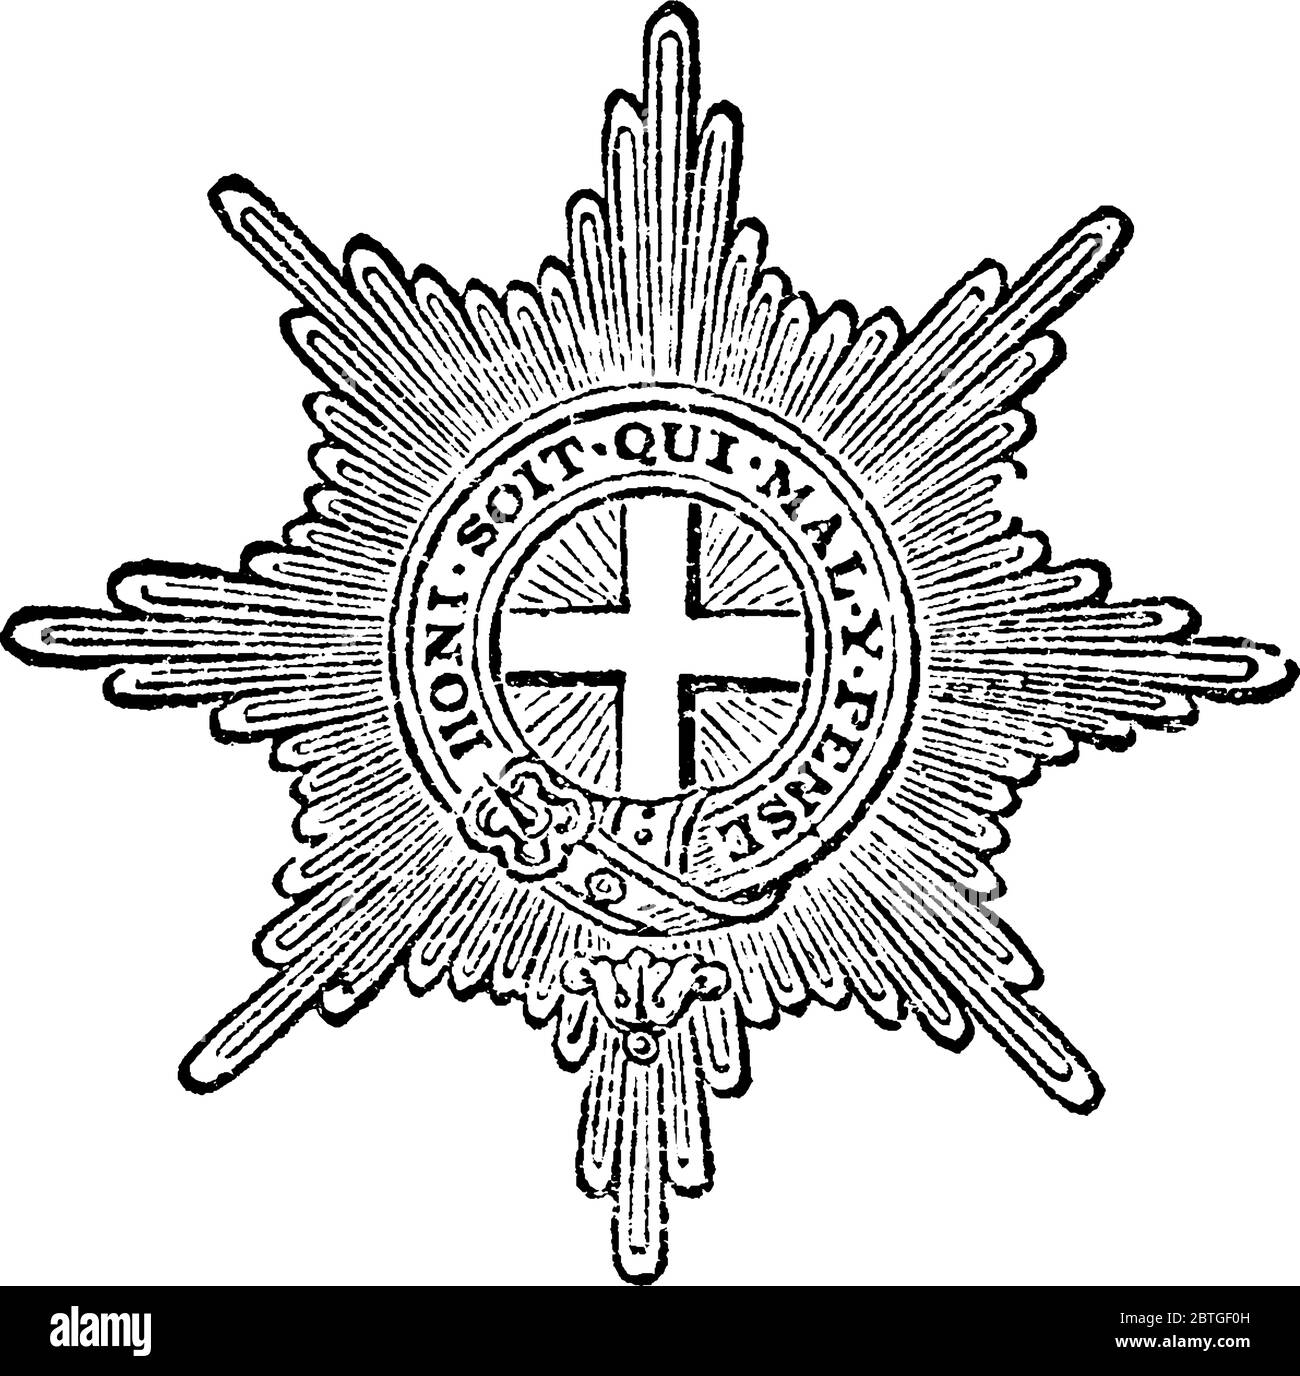 The Most Noble Order of the Garter is an order of chivalry, or knighthood, originating in medieval England, and presently bestowed on recipients in an Stock Vector